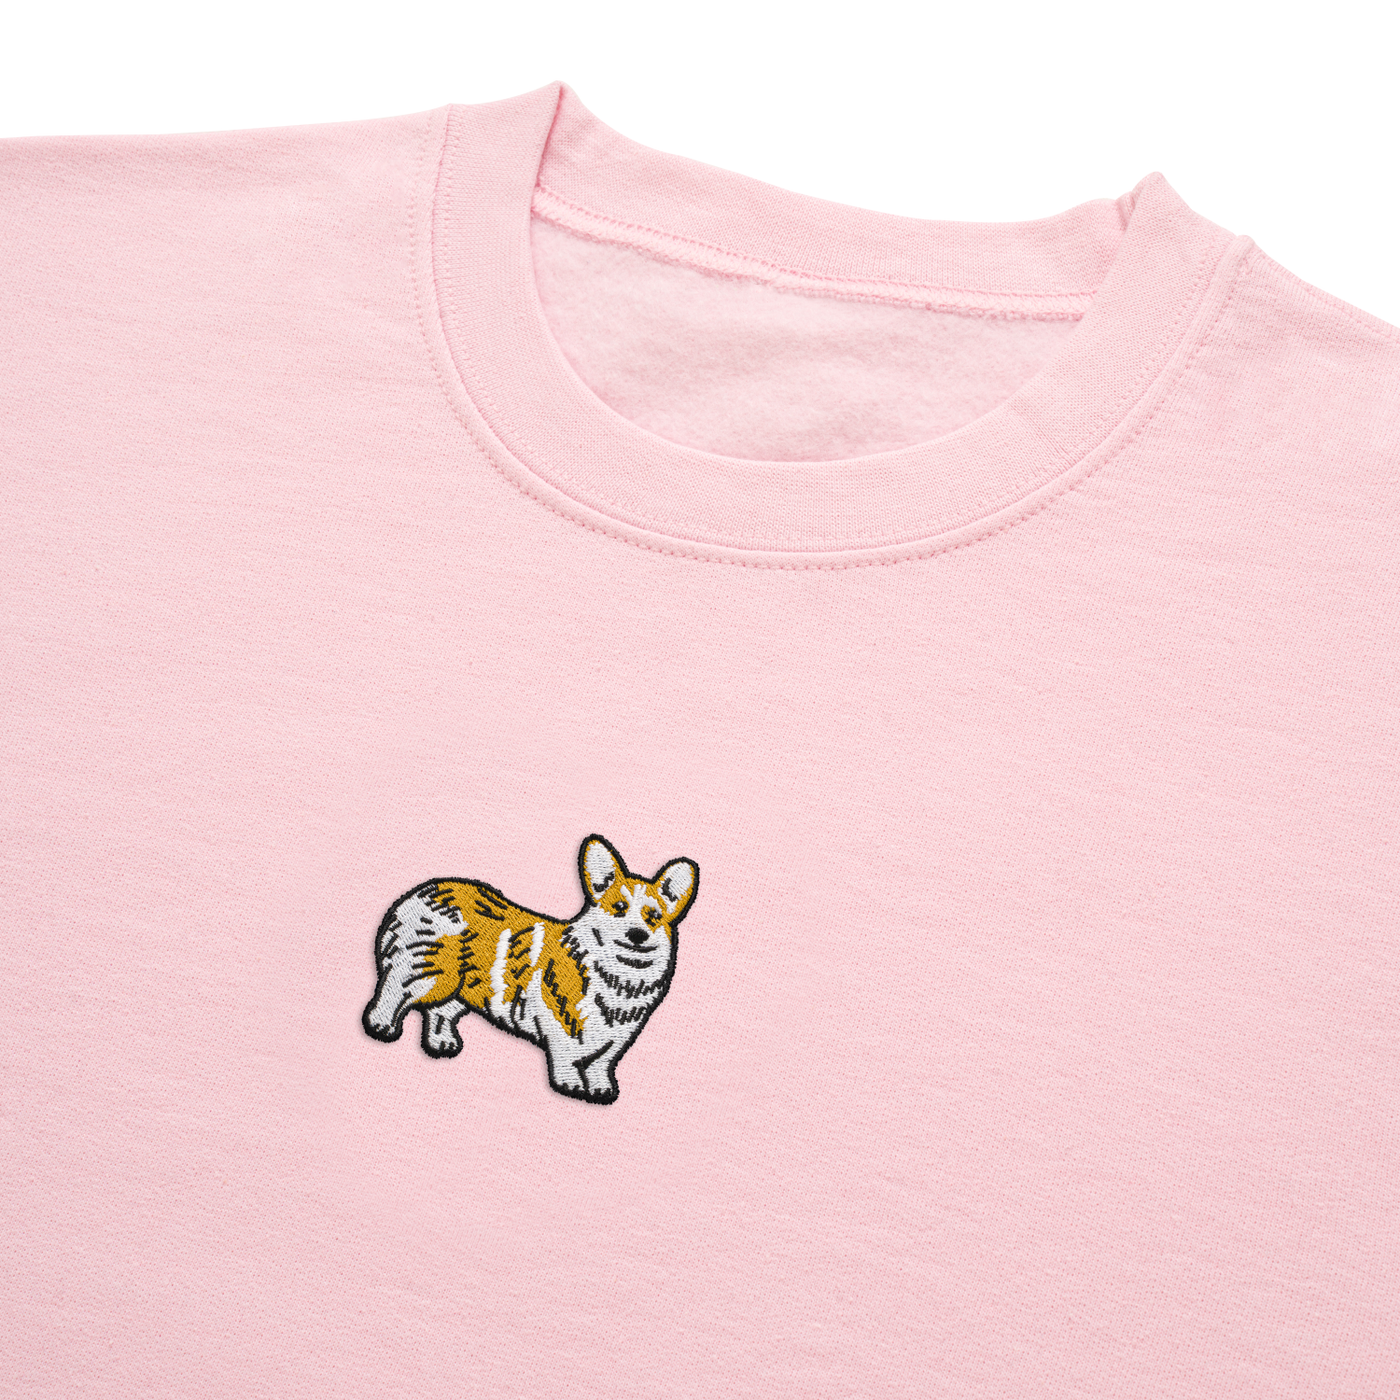 Bobby's Planet Women's Embroidered Corgi Sweatshirt from Paws Dog Cat Animals Collection in Light Pink Color#color_light-pink